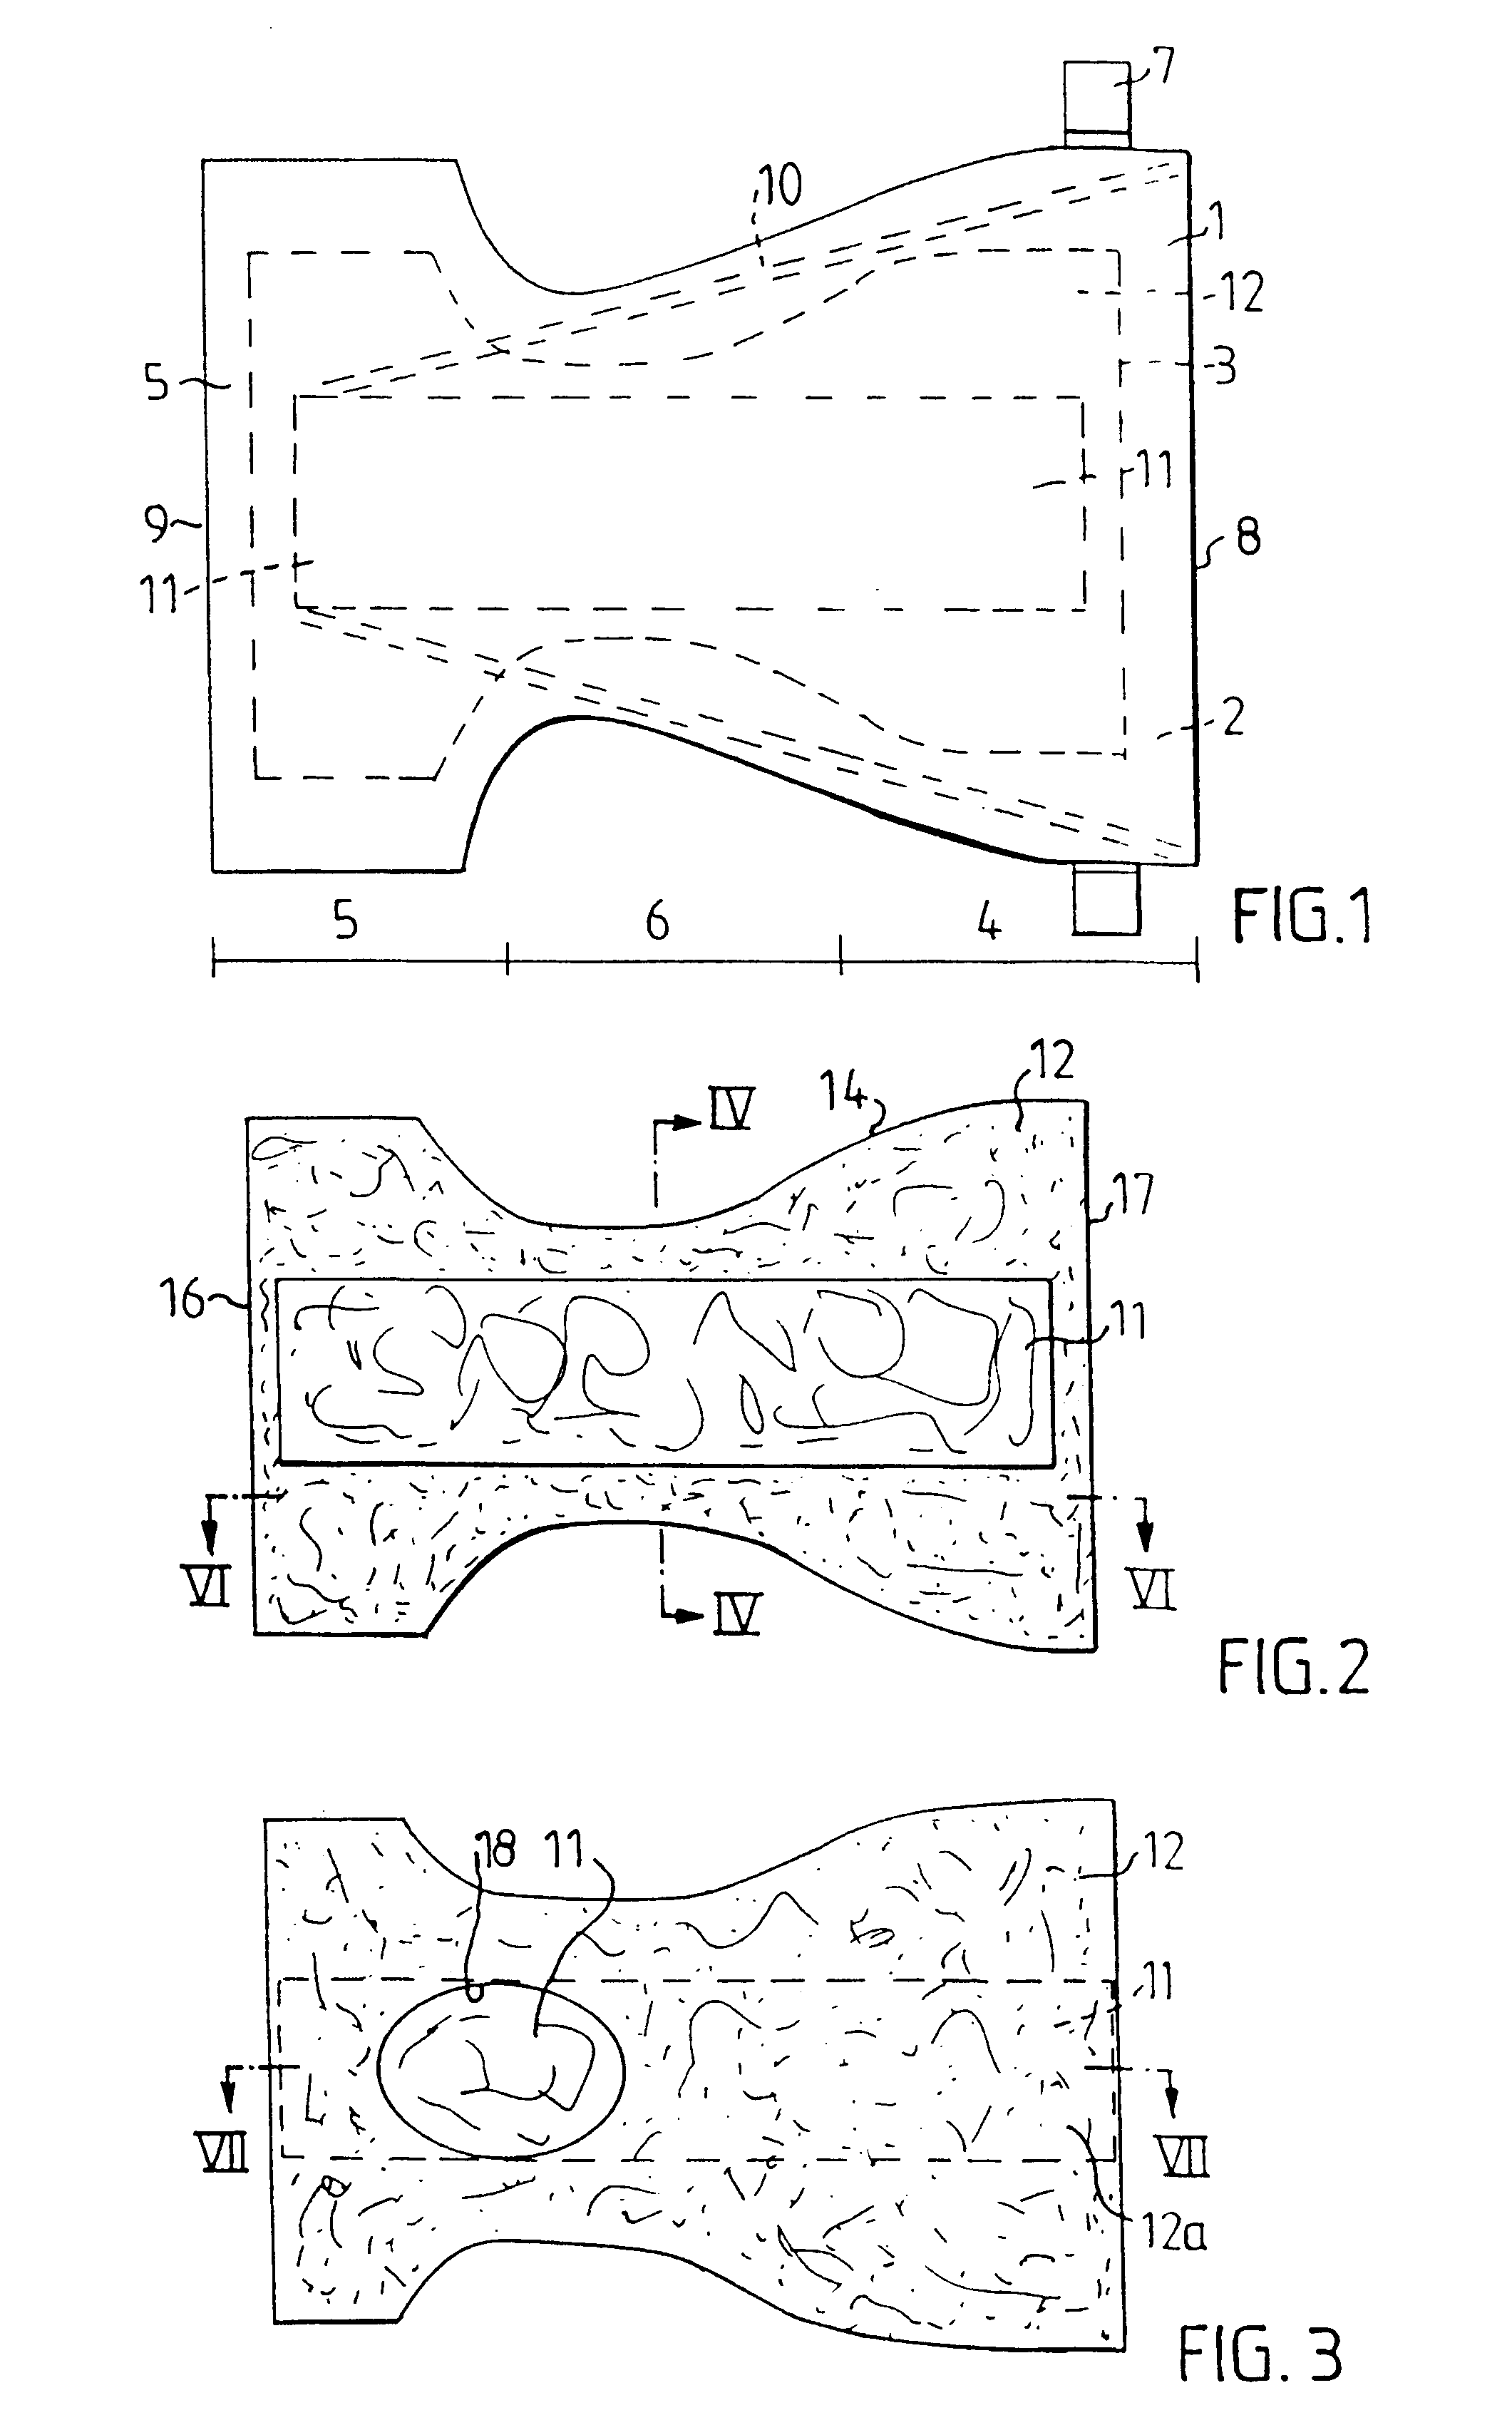 Absorbent structure that has a high degree of utilization